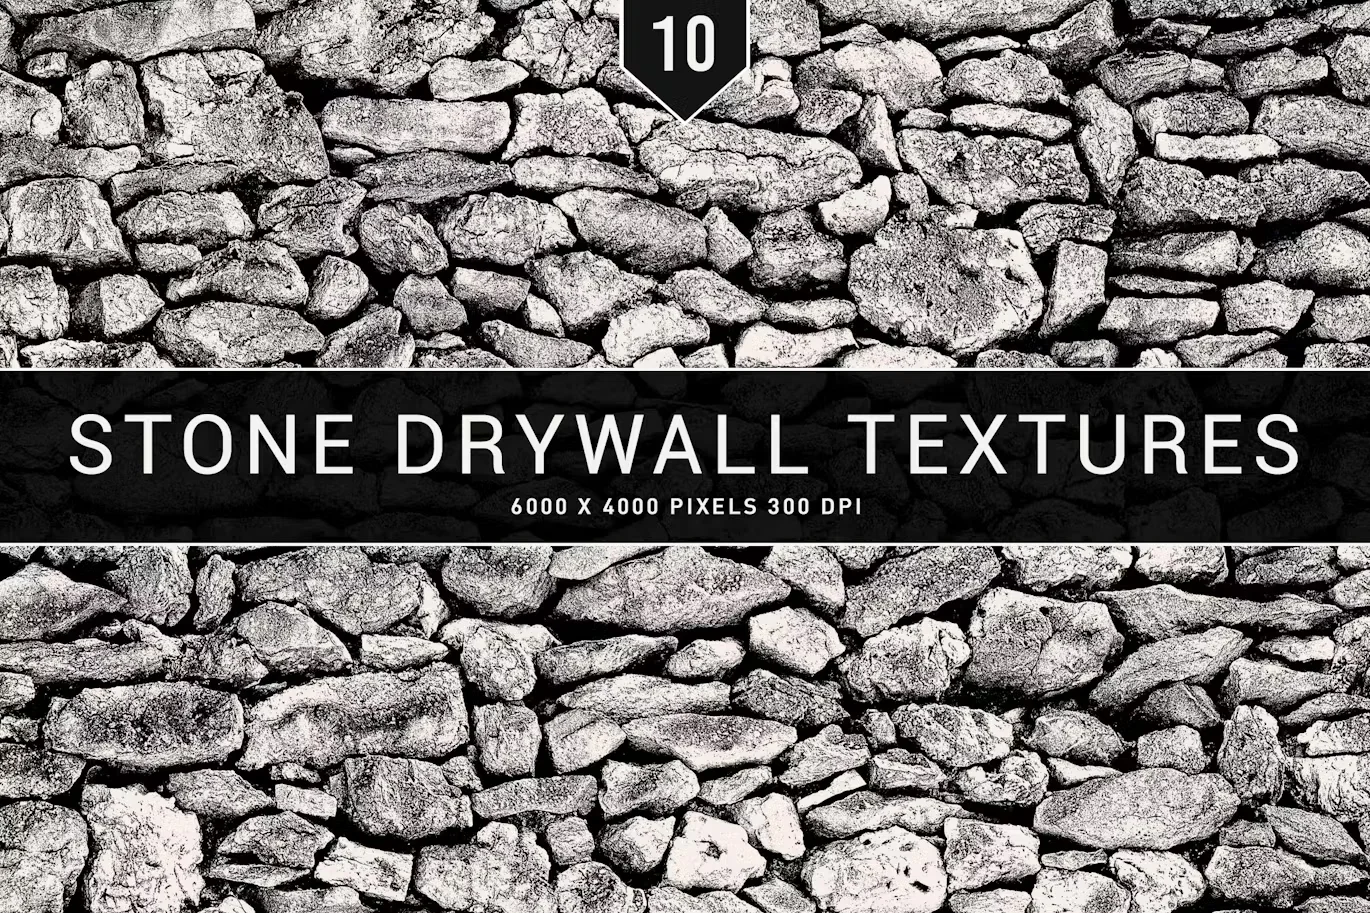 Stone Drywall Textures